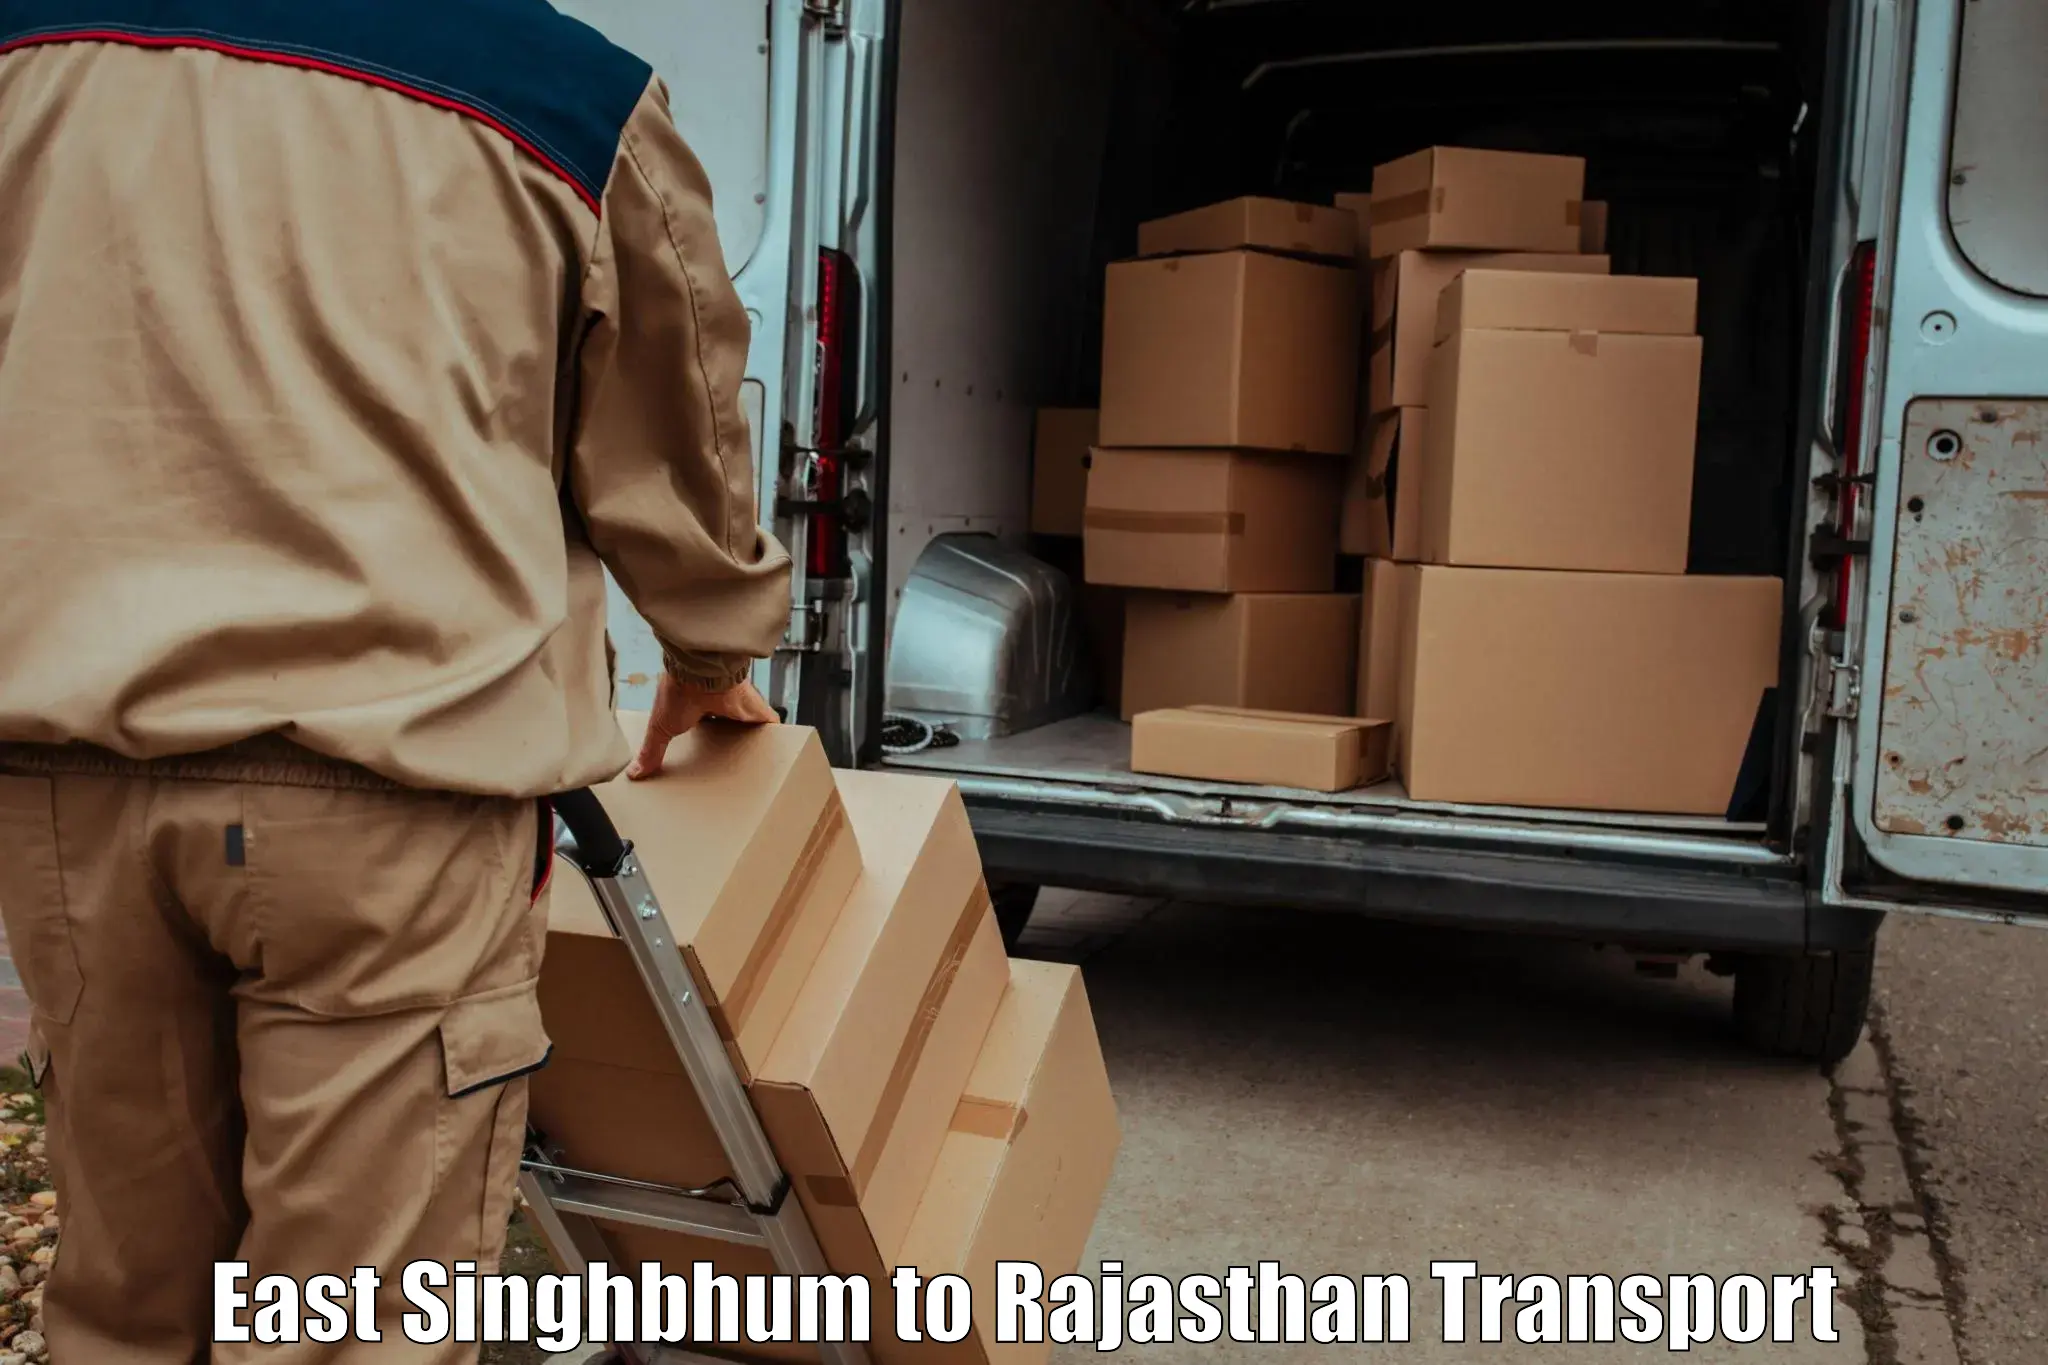 Goods delivery service East Singhbhum to Nainwa